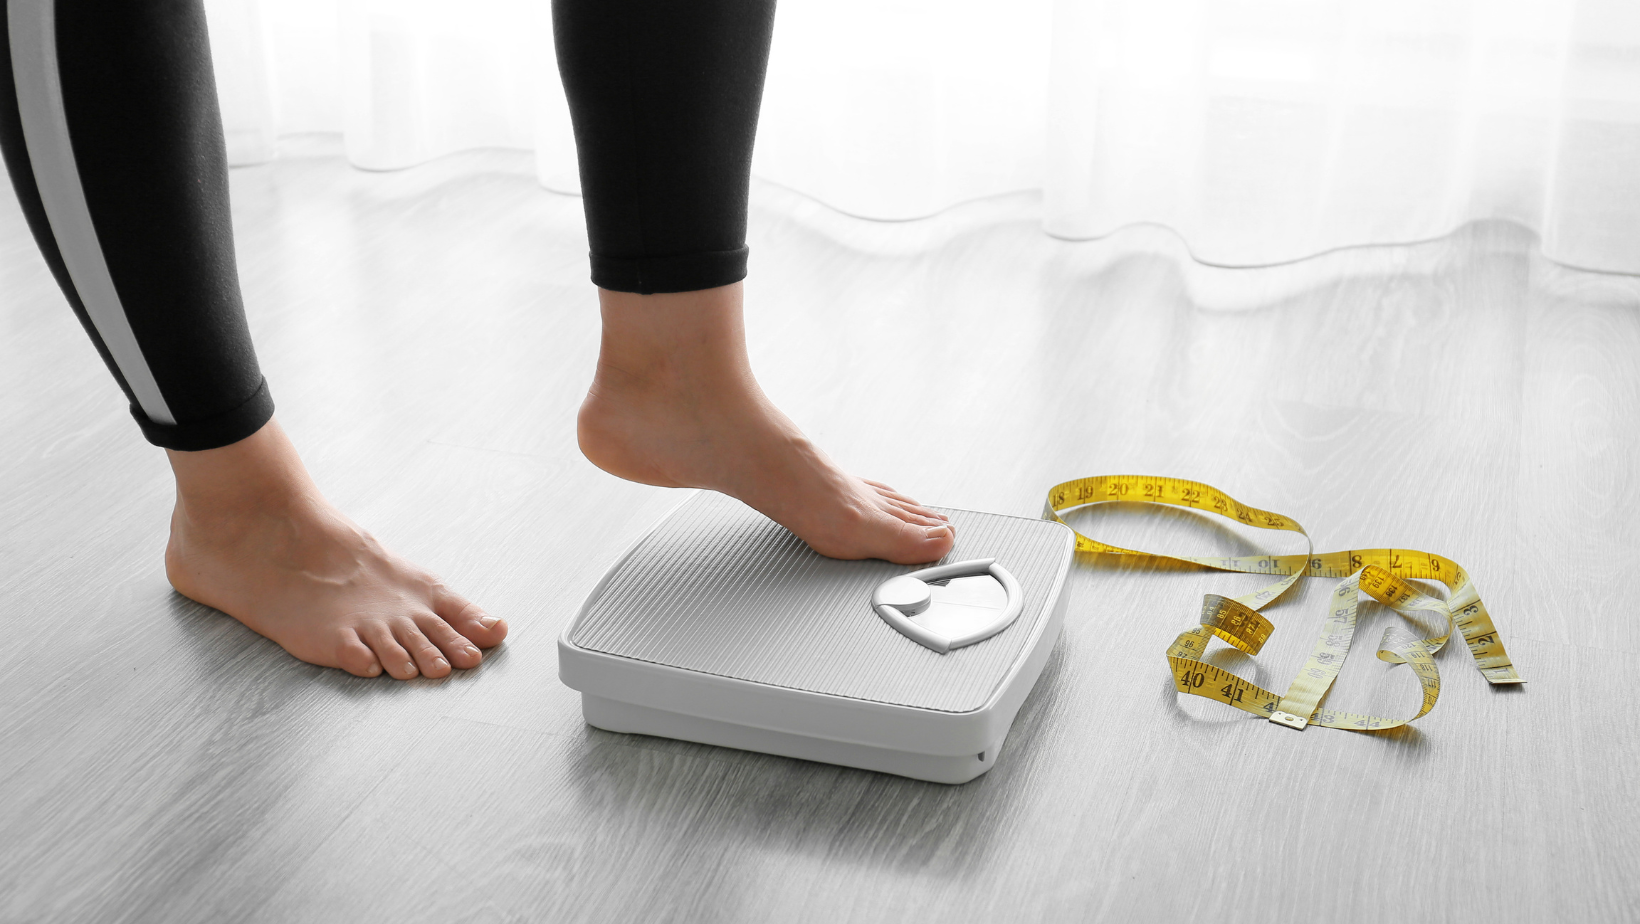 person stepping on scale with yellow measuring tape on the floor